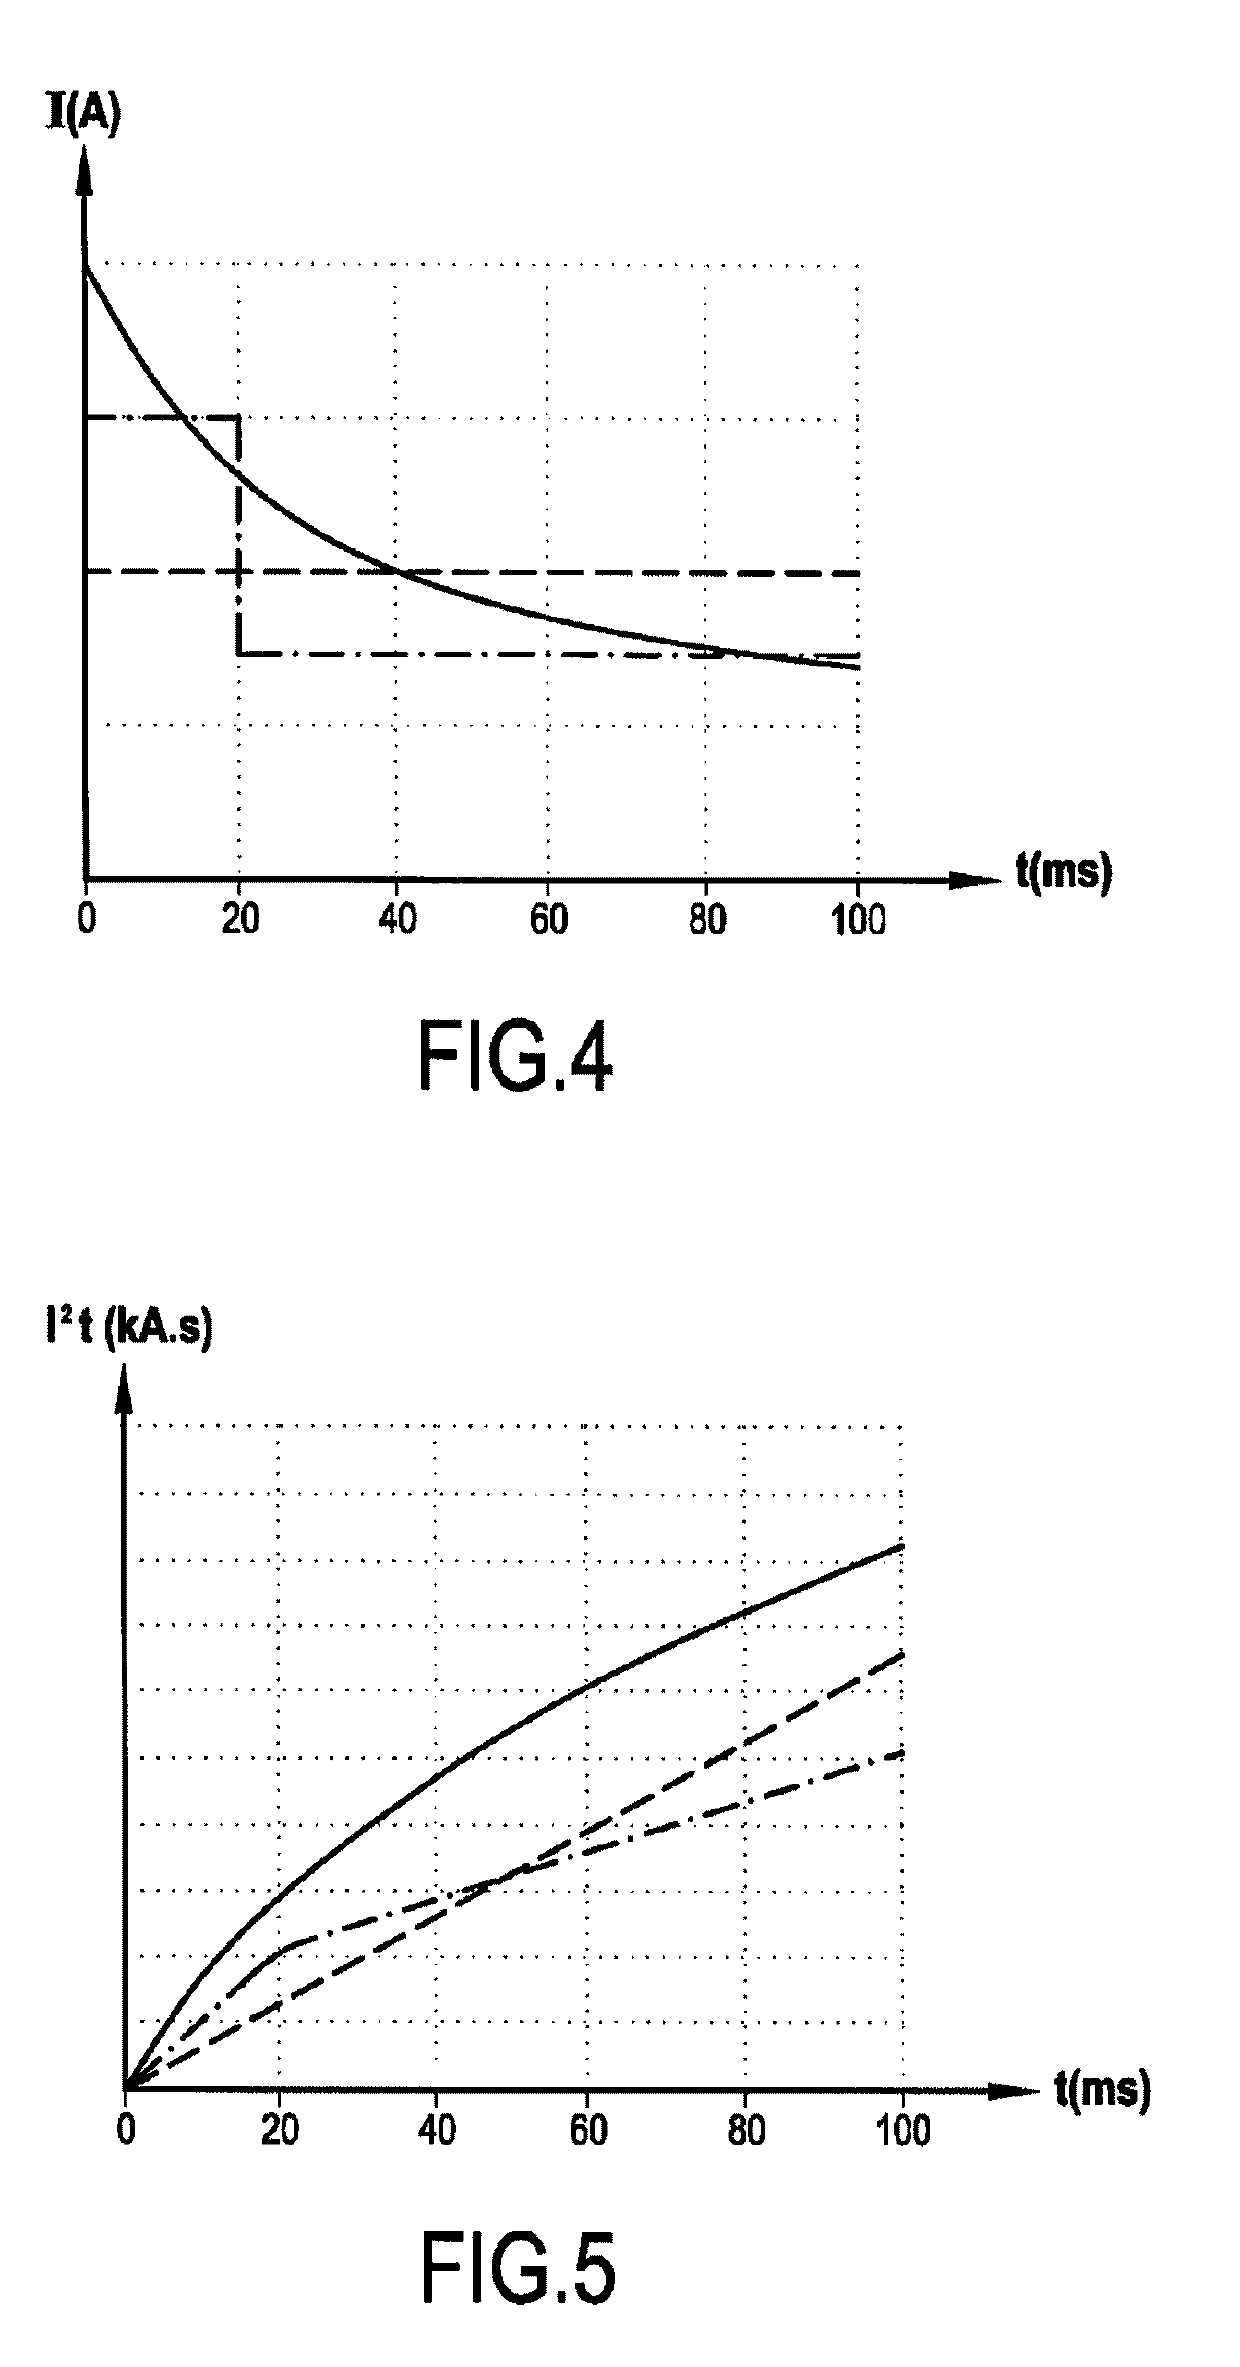 Method for generating a short-circuit current for triggering an electrical protection element